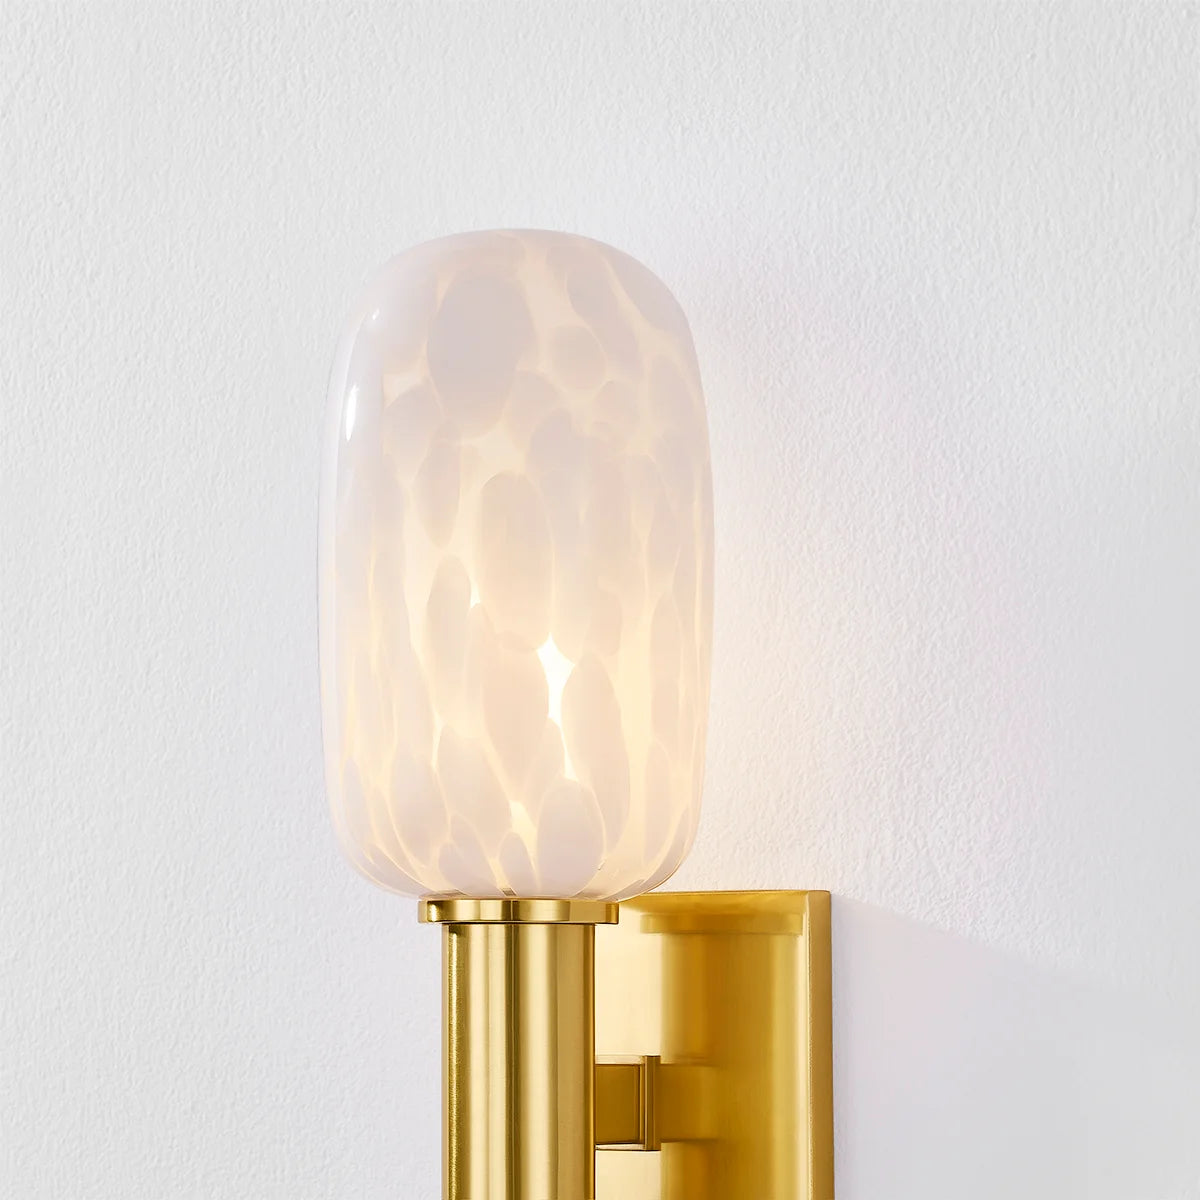 Abina Wall Sconce Wall Sconce 